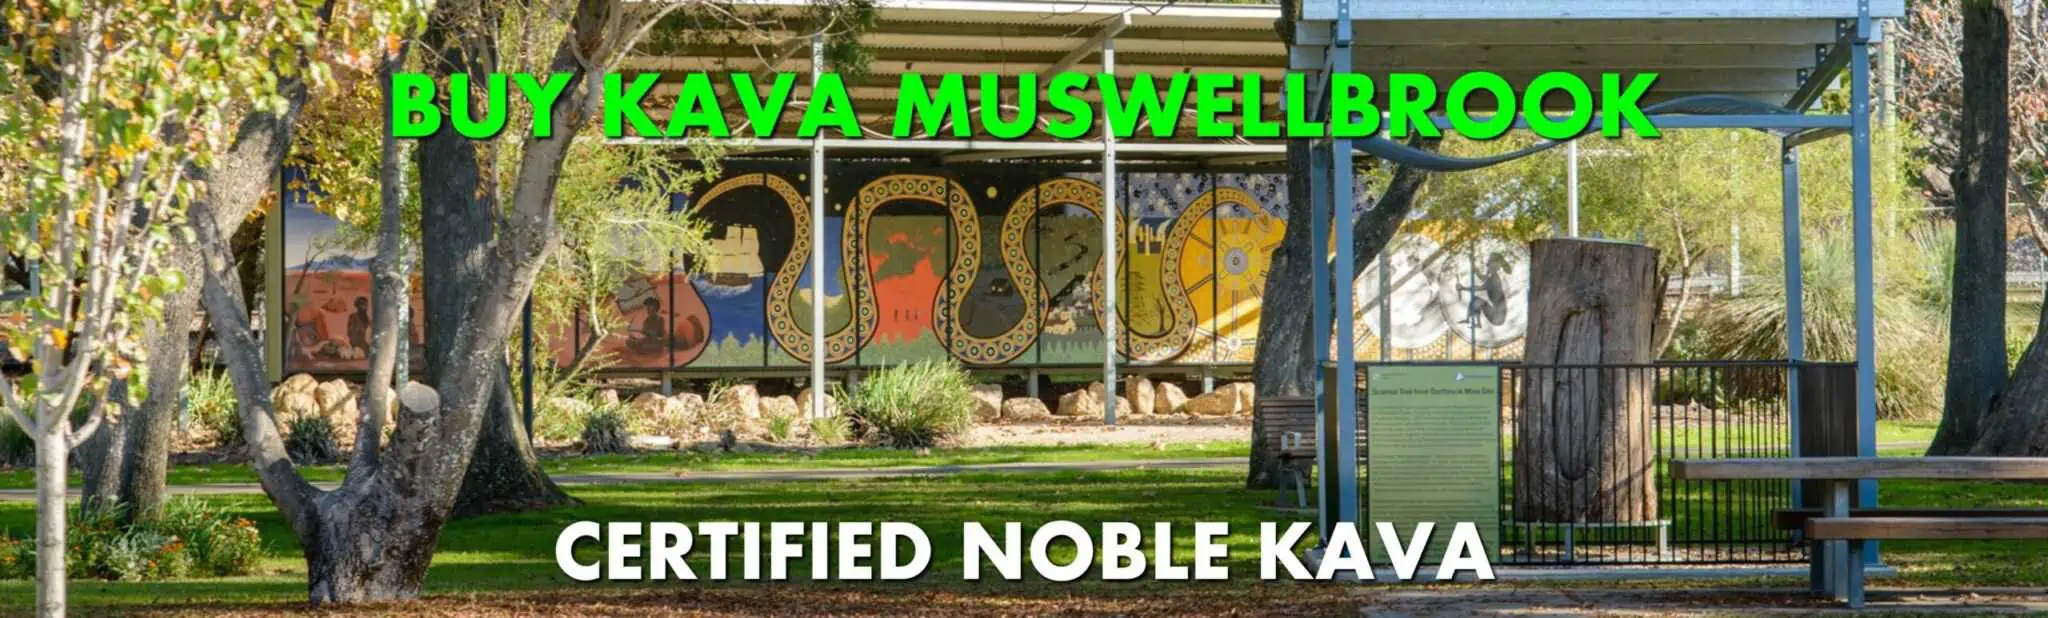 Artistic painting in Muswellbrook park New South Wales with caption Buy Kava Muswellbrook Certified Noble Kava